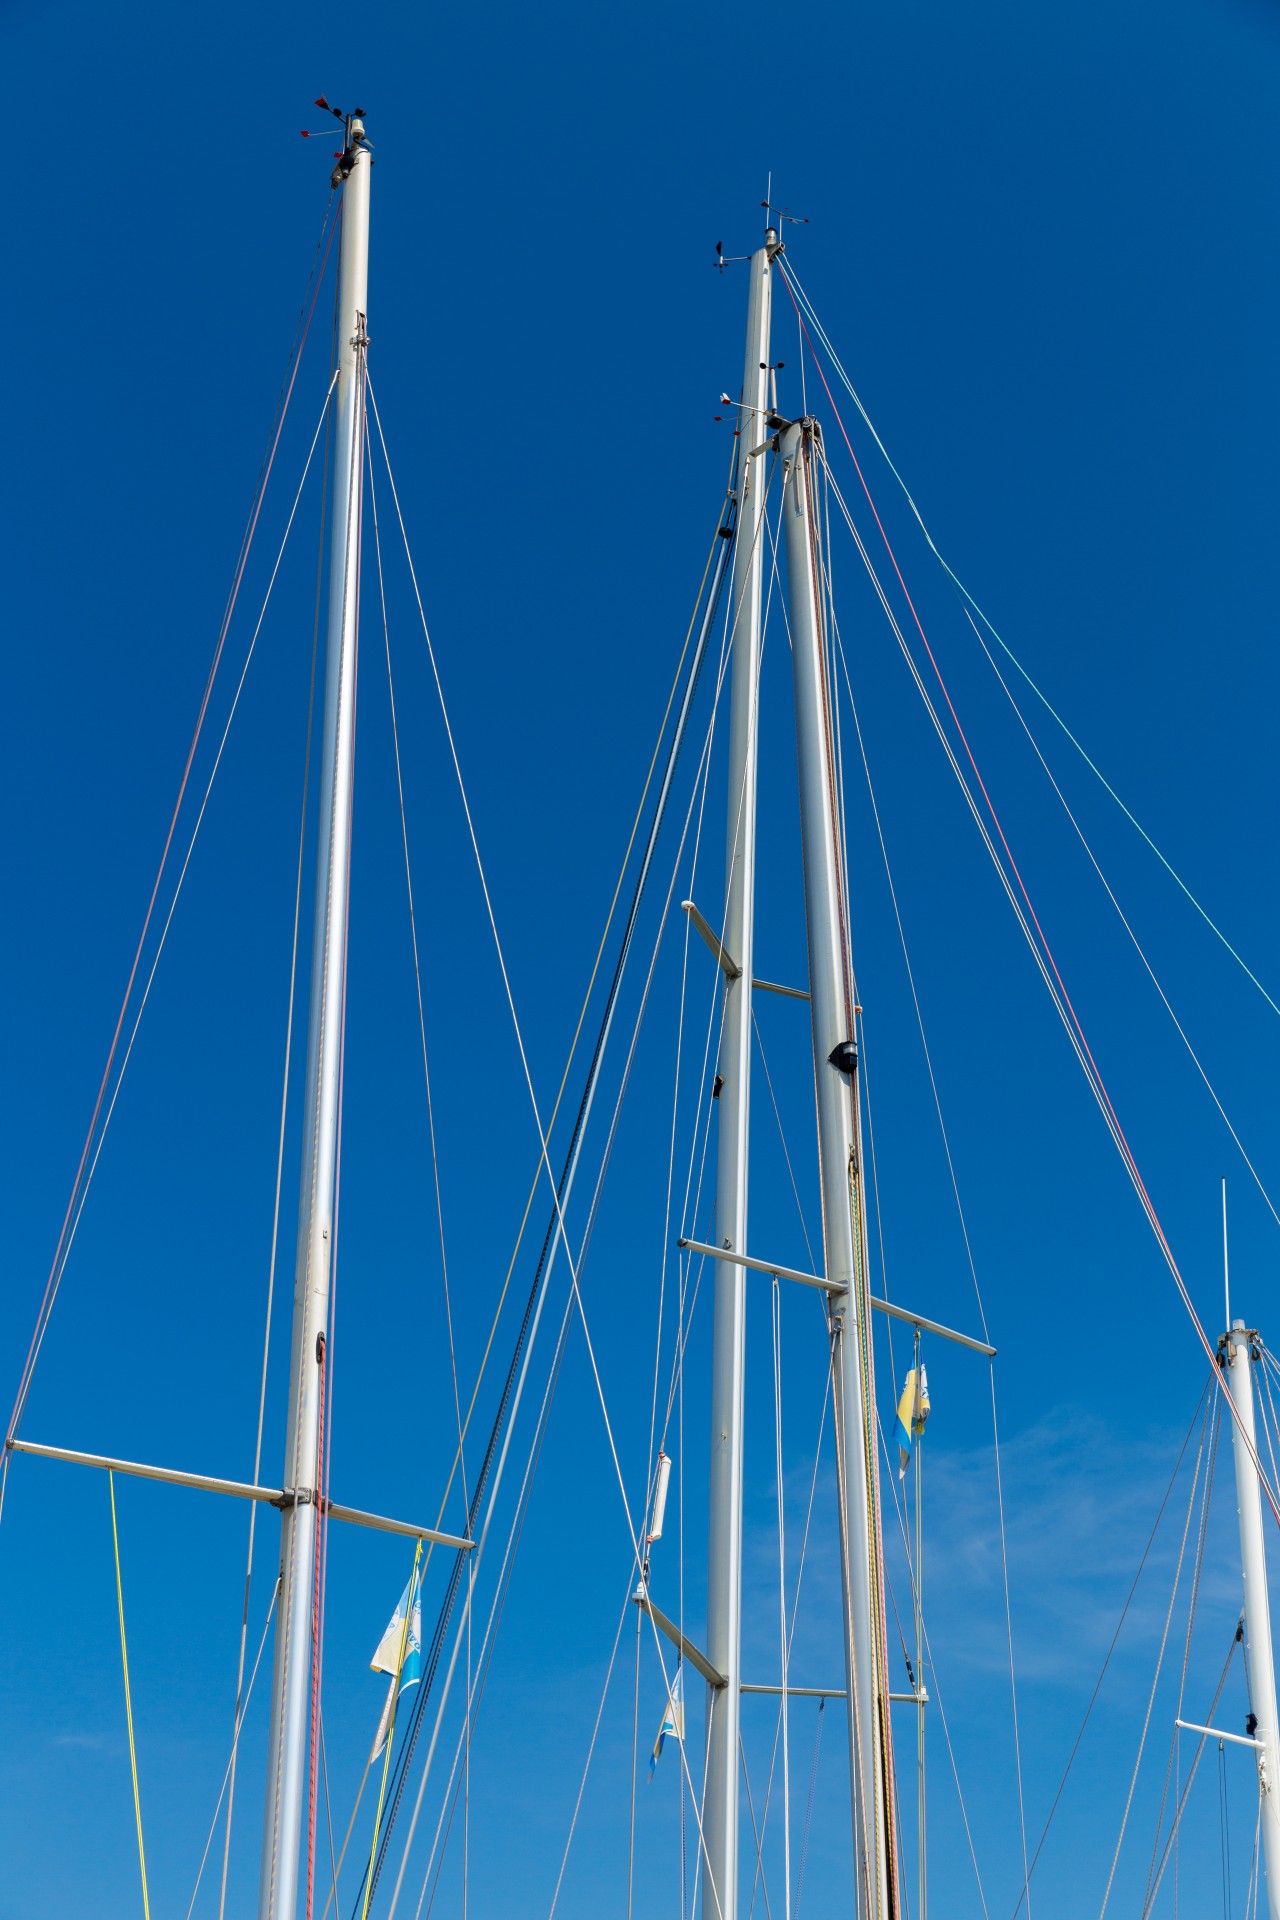 yacht with masts